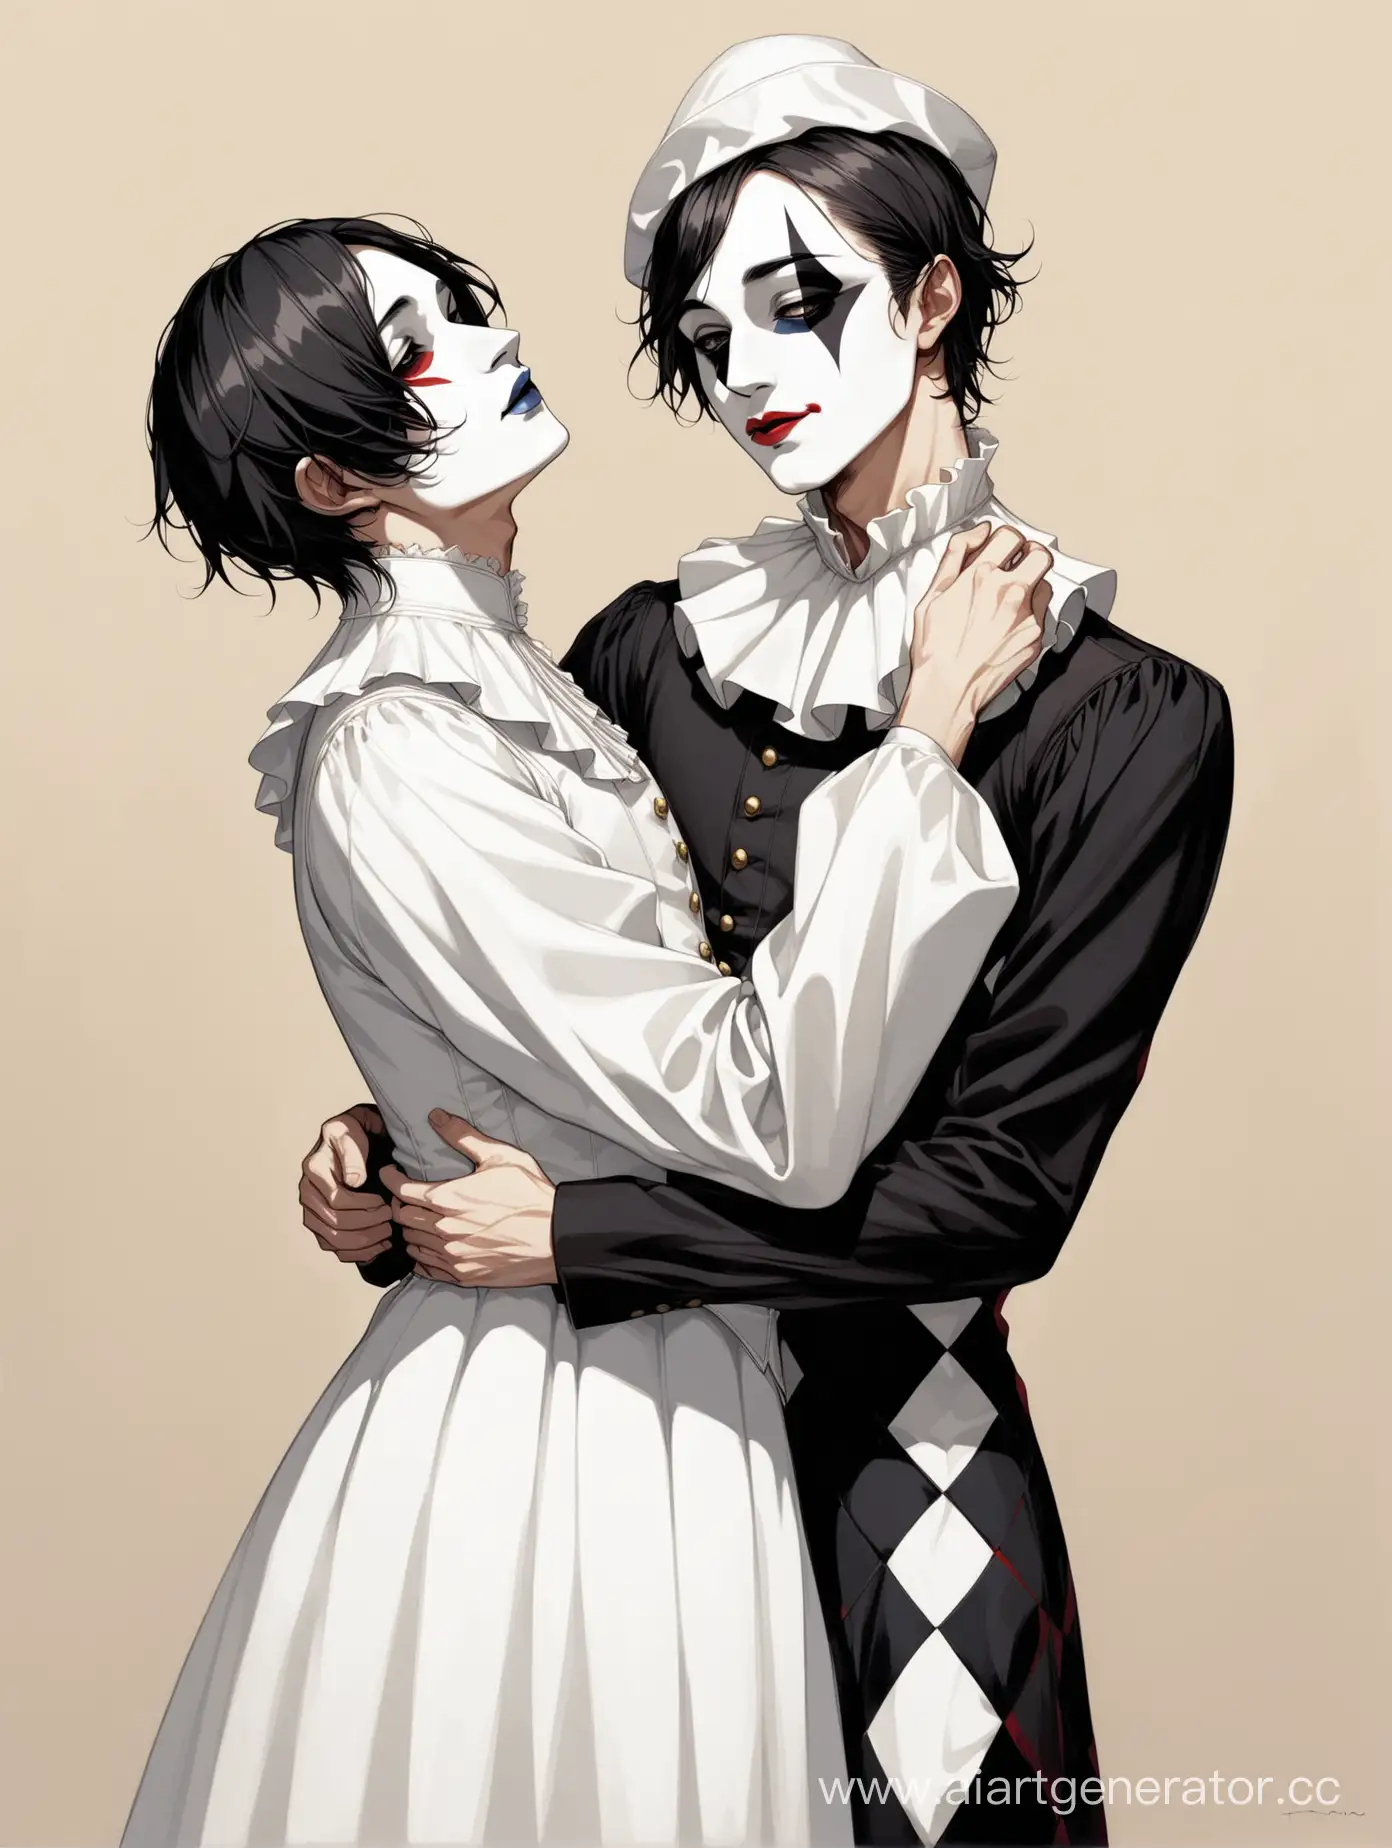 Minimalist-Embrace-Harlequin-and-Pierrot-Men-in-Intimate-Embrace